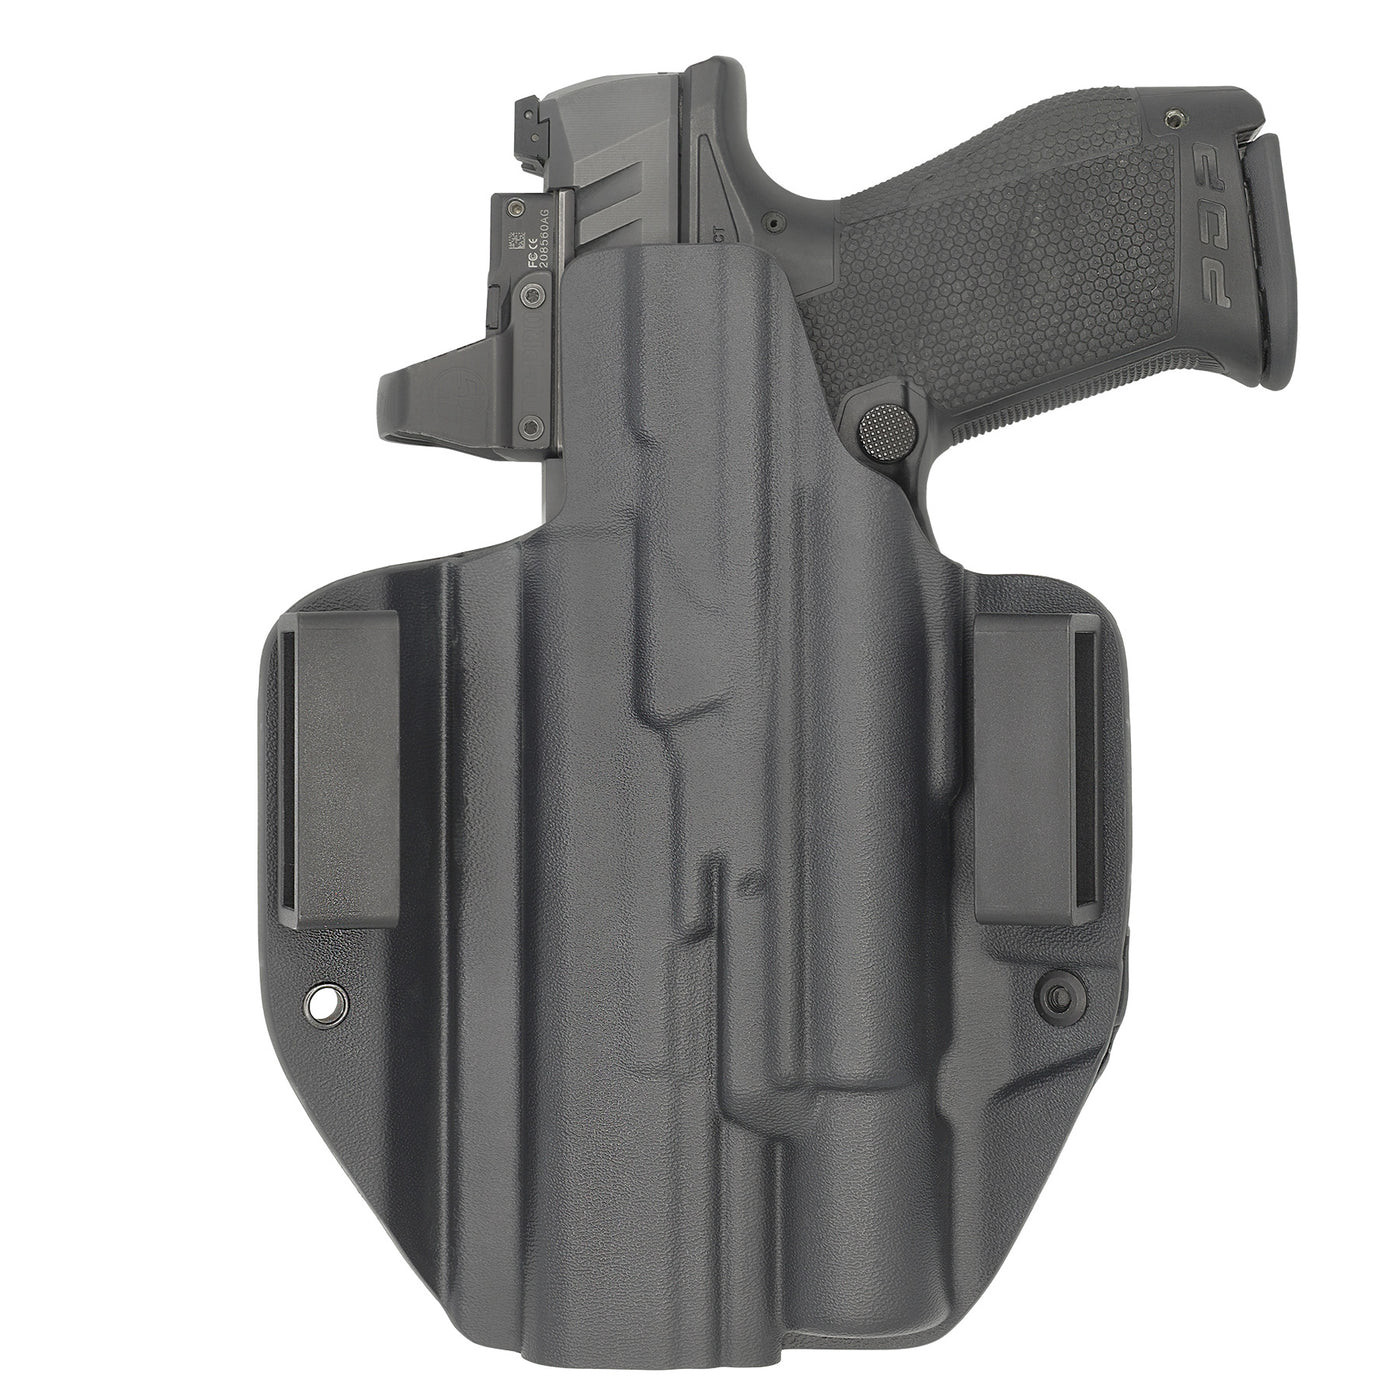 C&G Holsters quickship OWB Tactical H&K P30 Surefire X300 in holstered position back view